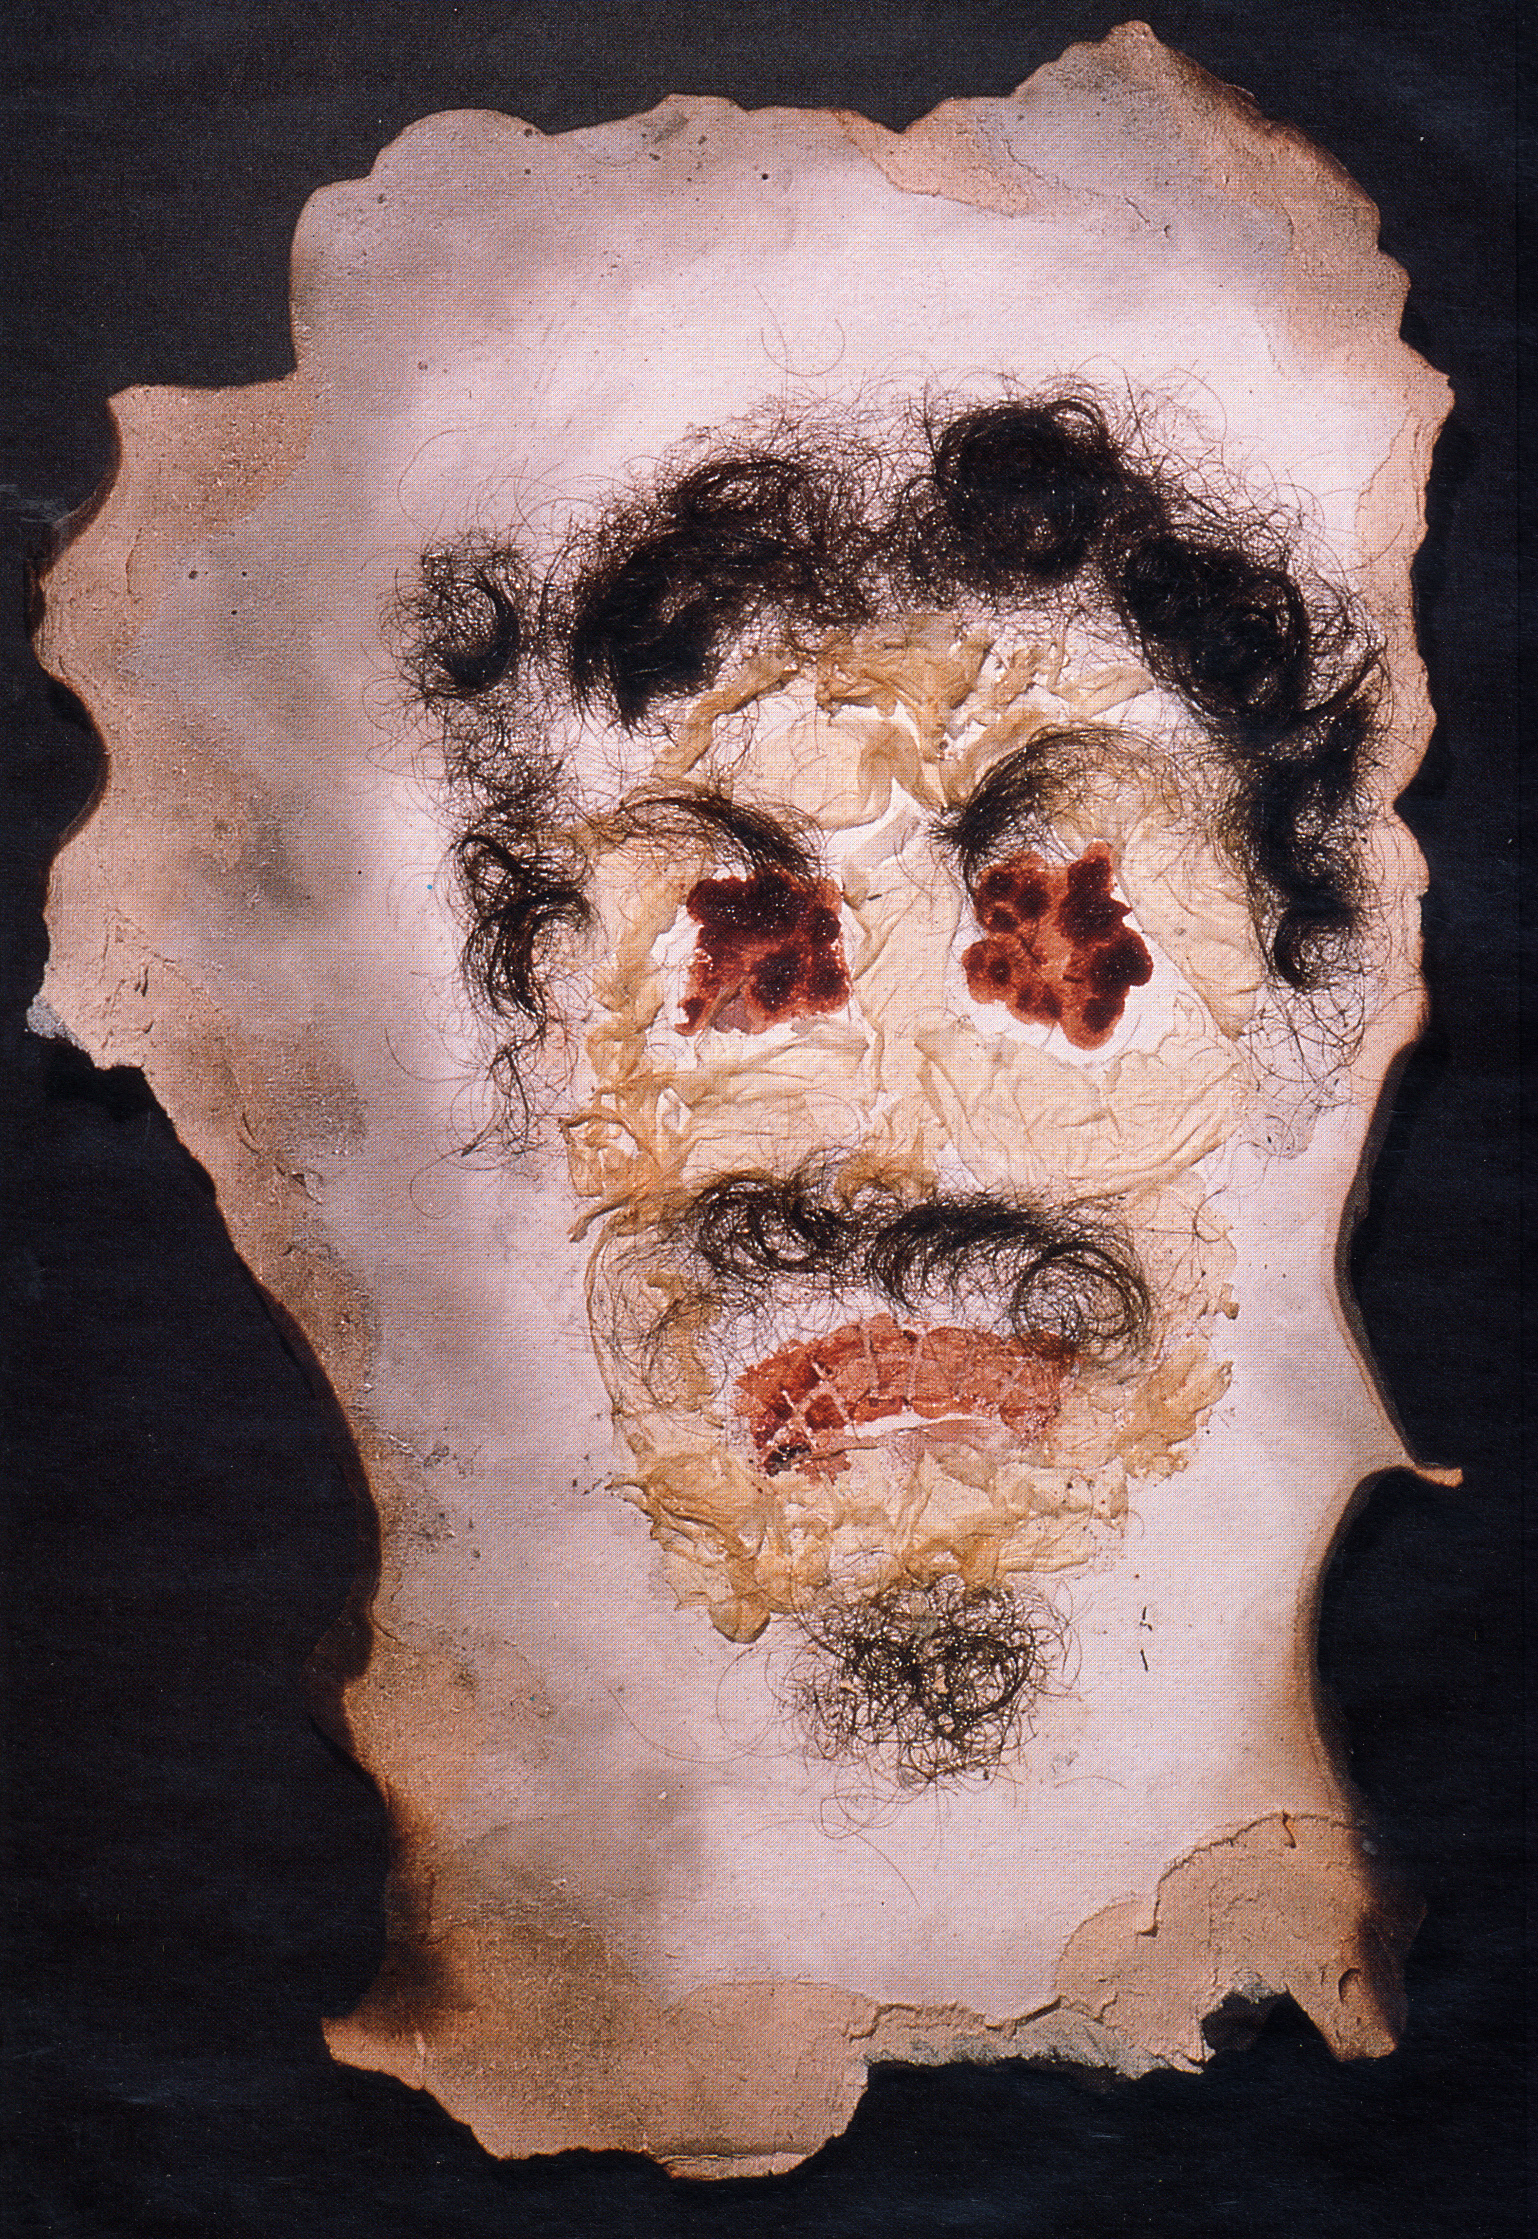 Self-Portrait Made from My Own Skin, Blood, Hair, Piss and Sperm